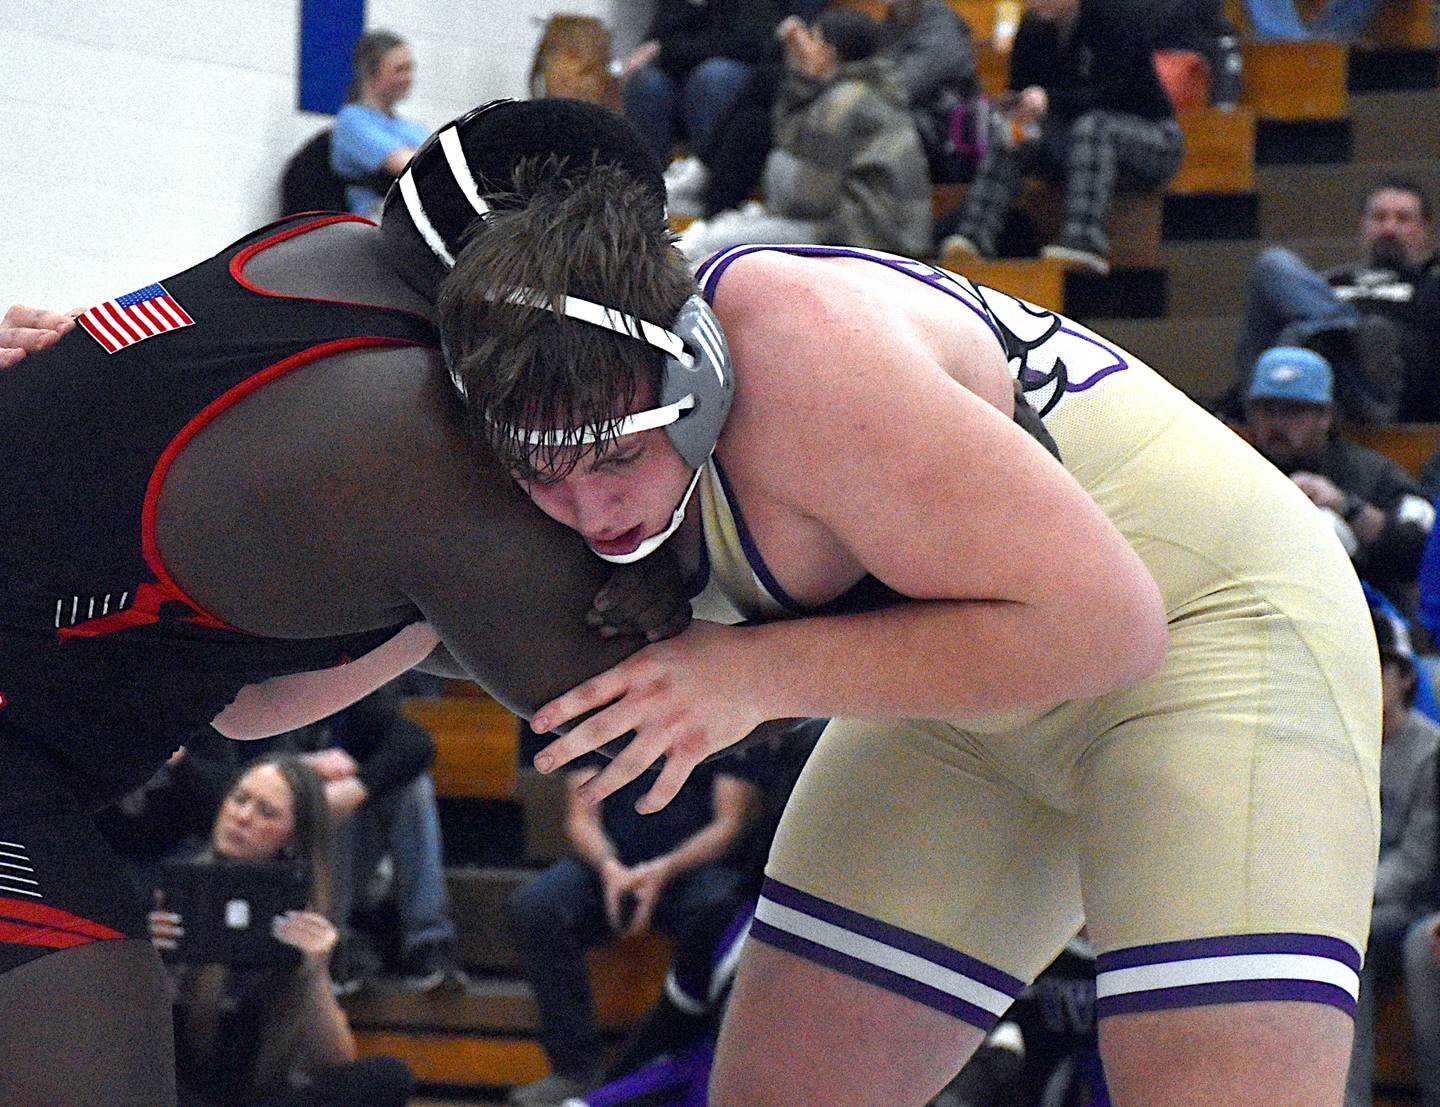 Wolverine junior Trent Warner wrestles an opponent from Cardinal of Eldon in the finals at districts Feb. 10 in Truro.